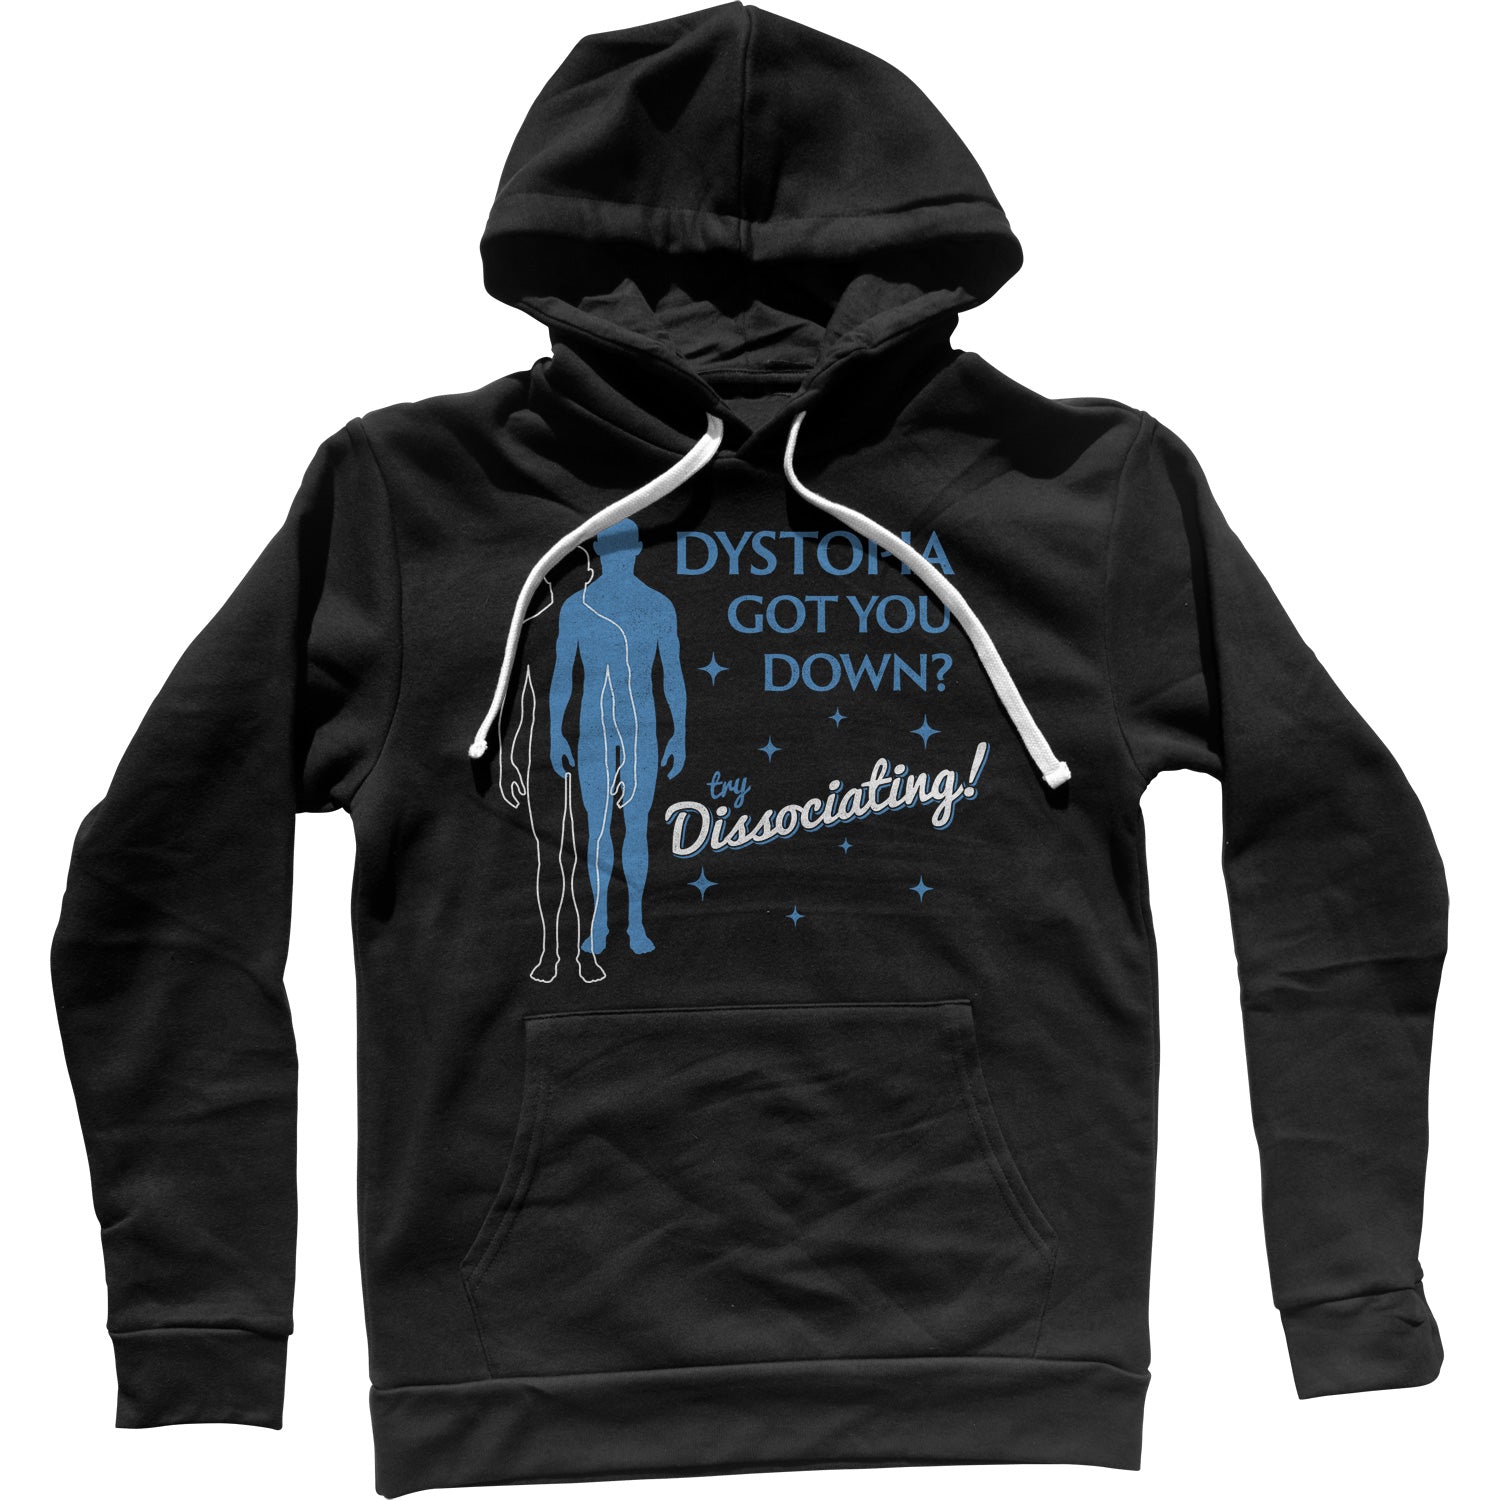 Dystopia Got You Down? Try Dissociating! Unisex Hoodie